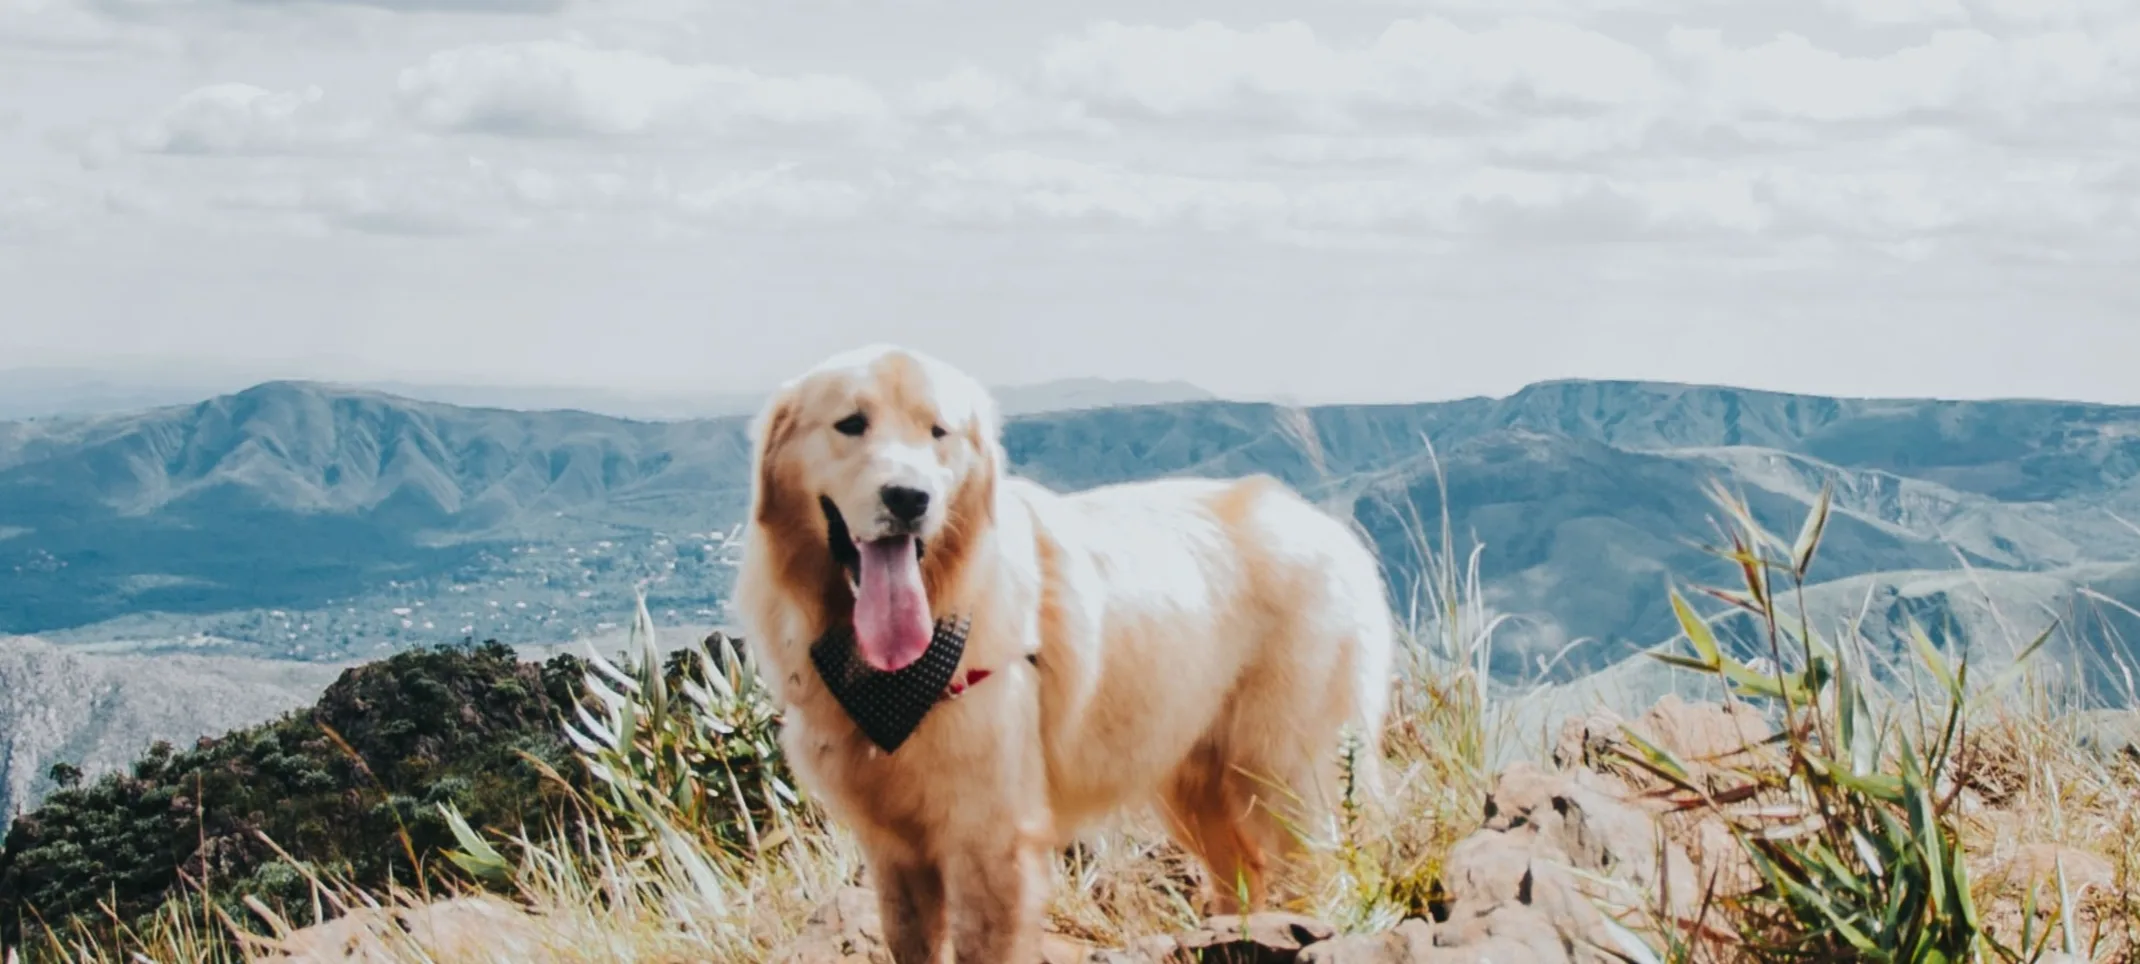 Dog on cliff with mountains